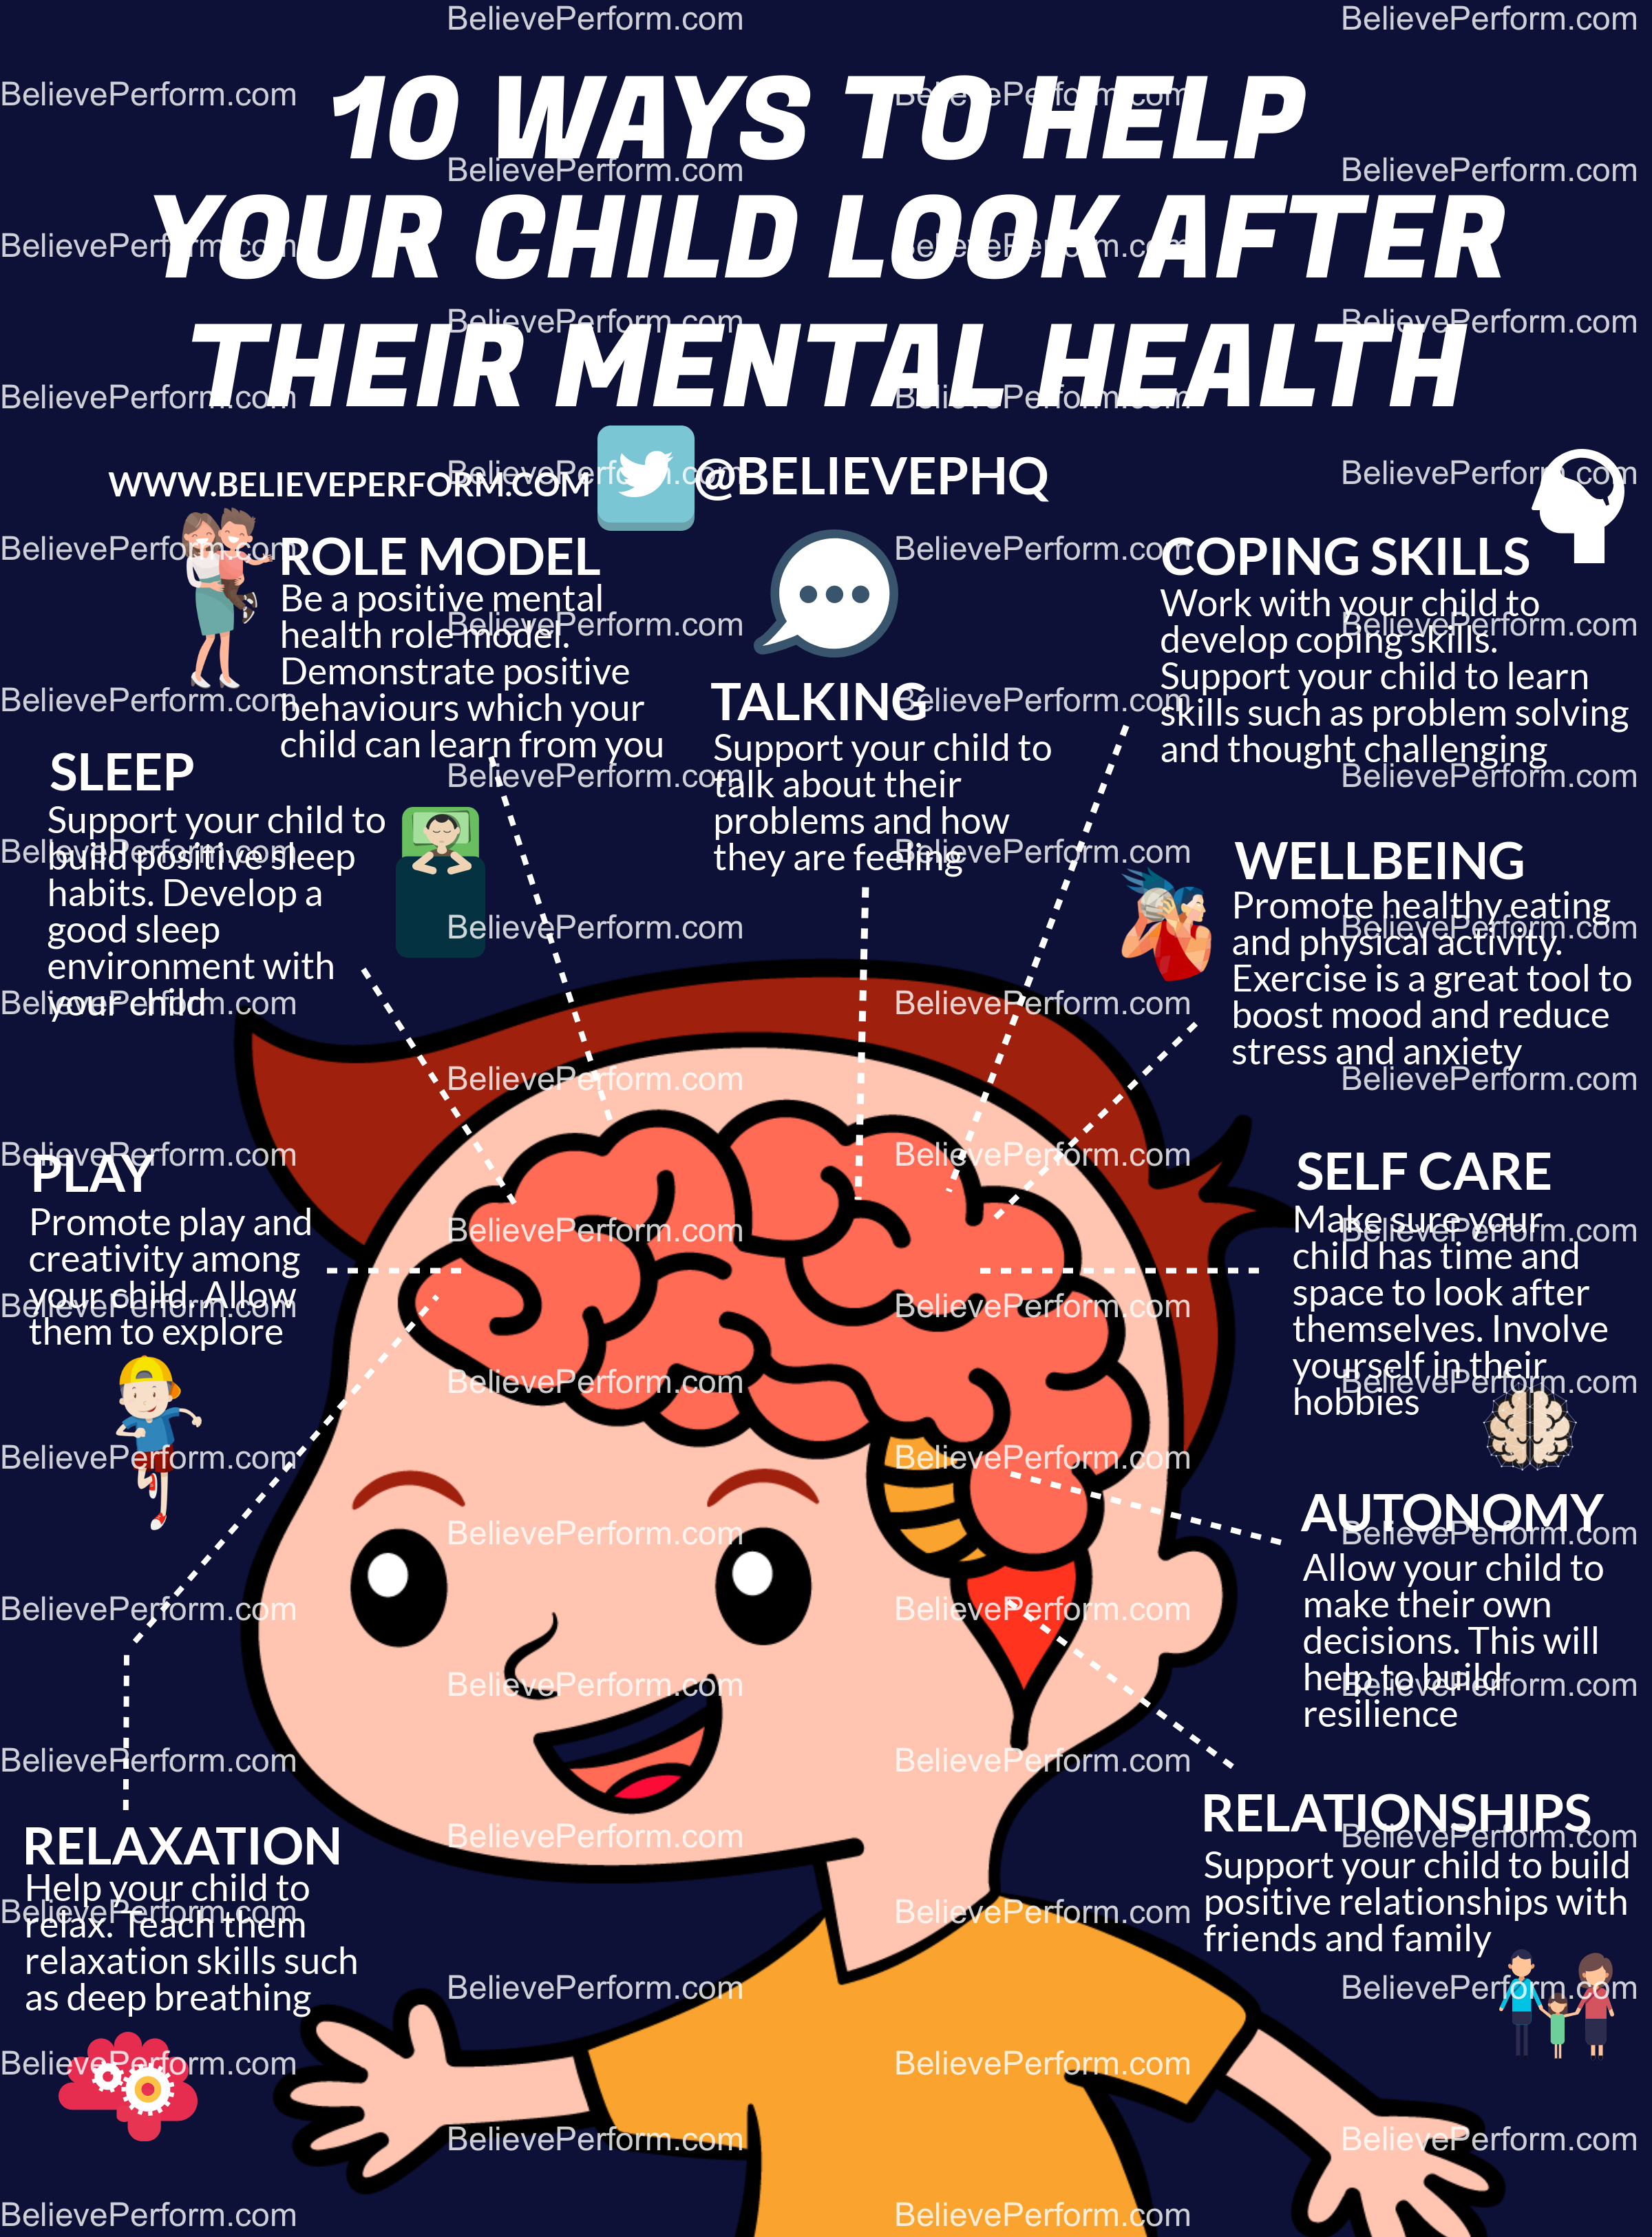 10 ways to help your child look after their mental health